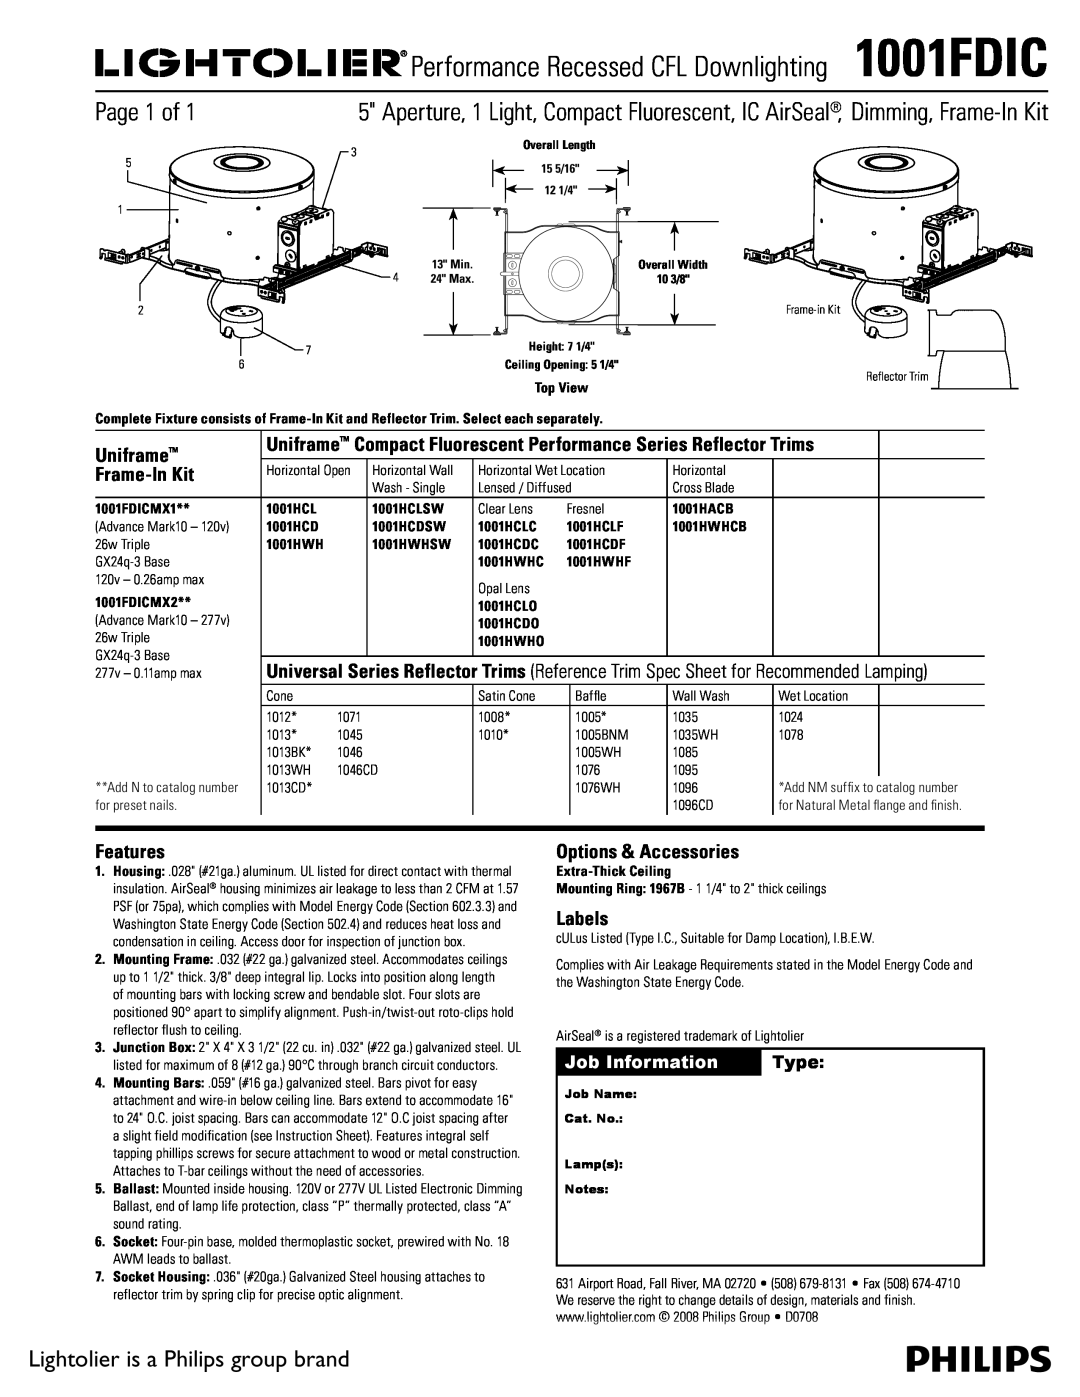 Lightolier 1001FDIC instruction sheet Page 1 of, Lightolier is a Philips group brand, Uniframe, Frame-InKit, Features 